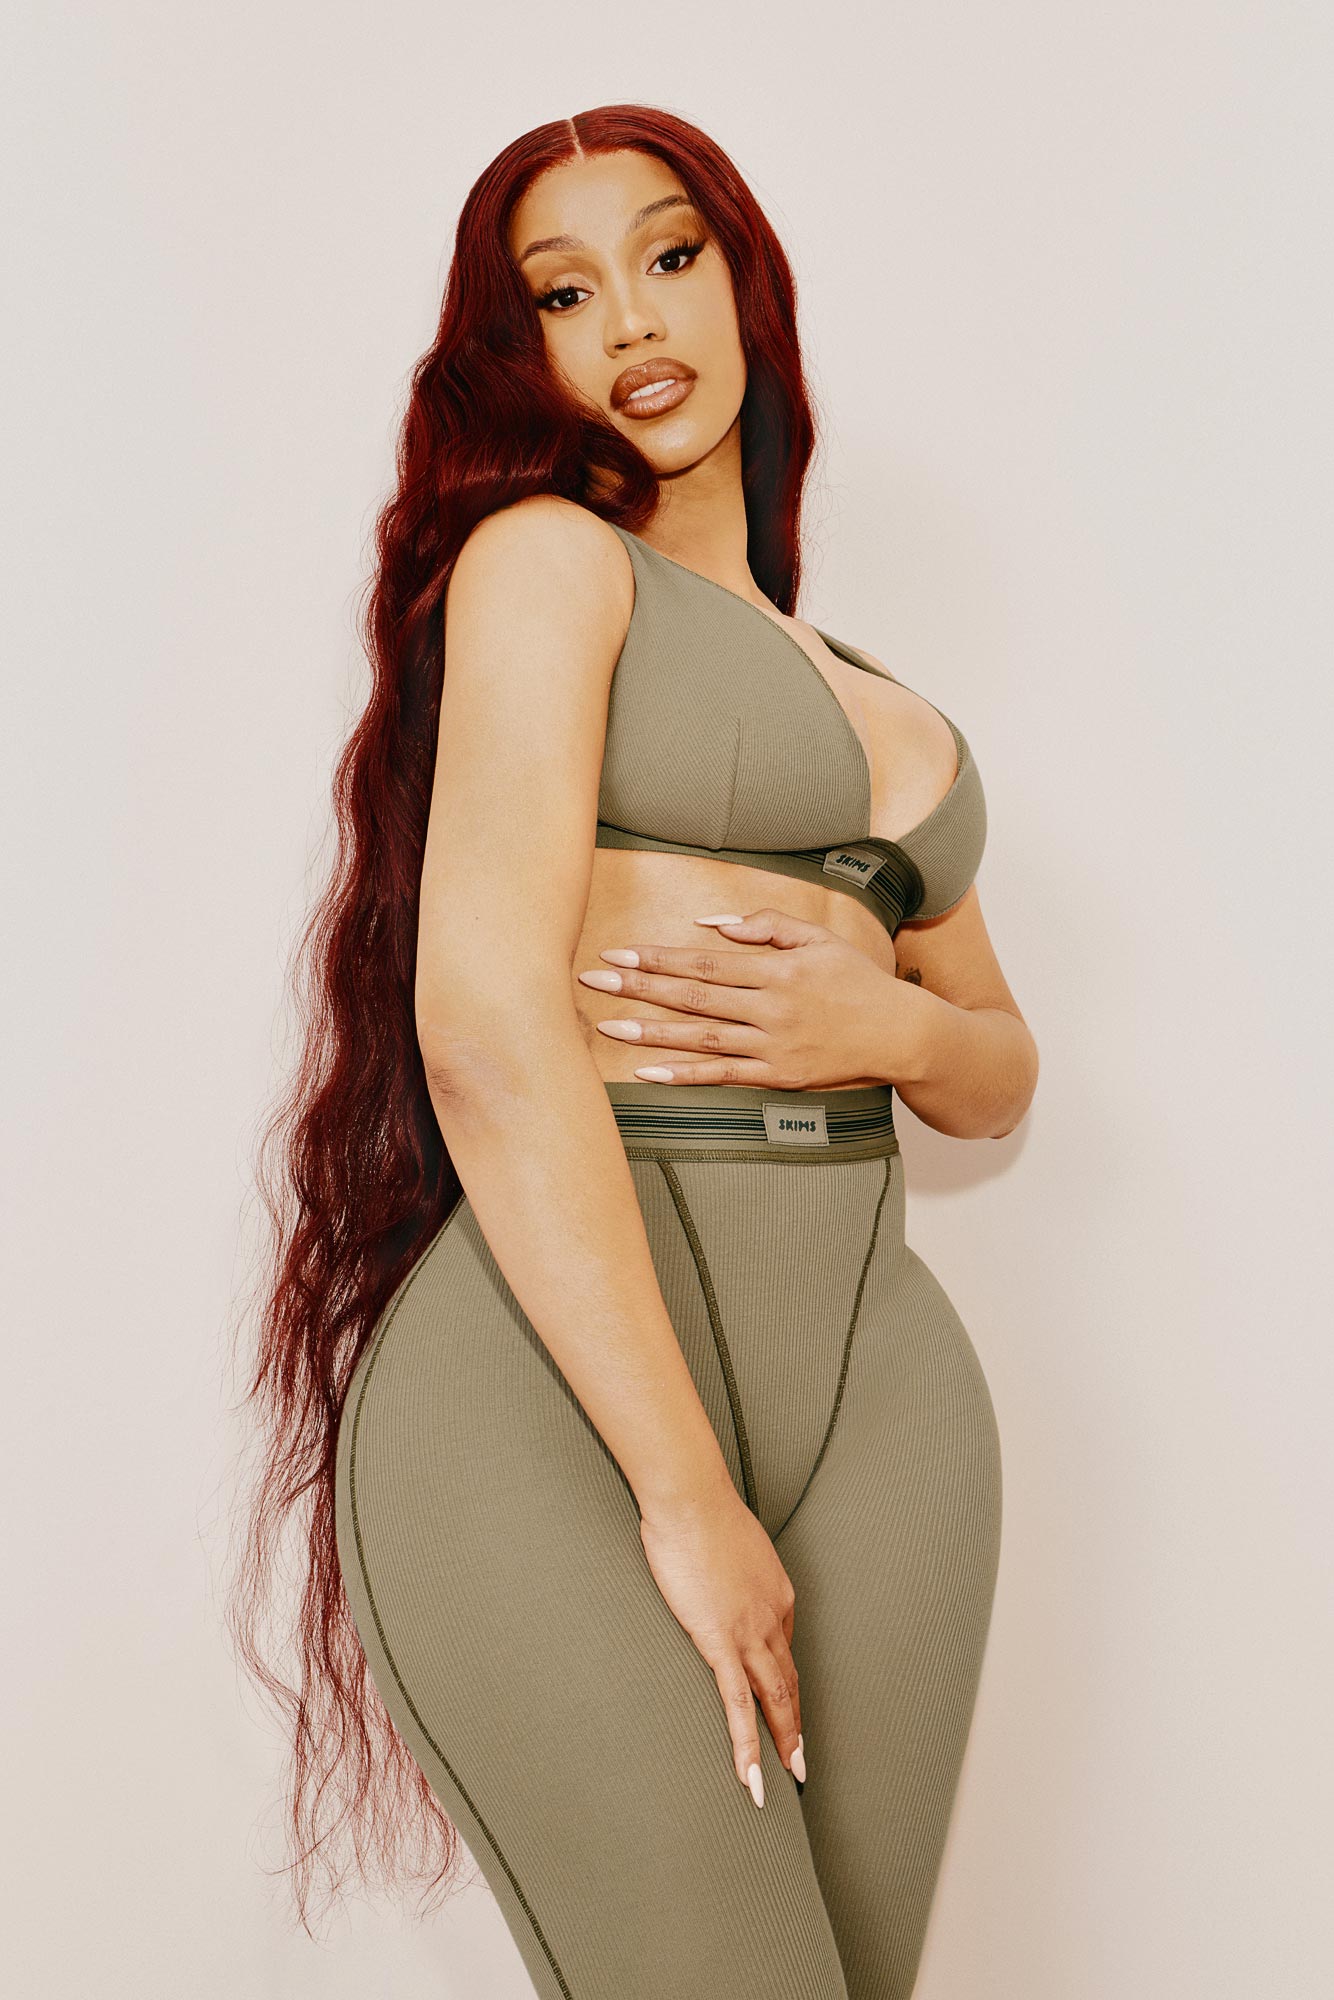 Cardi B Models Skims in Sexy New Campaign